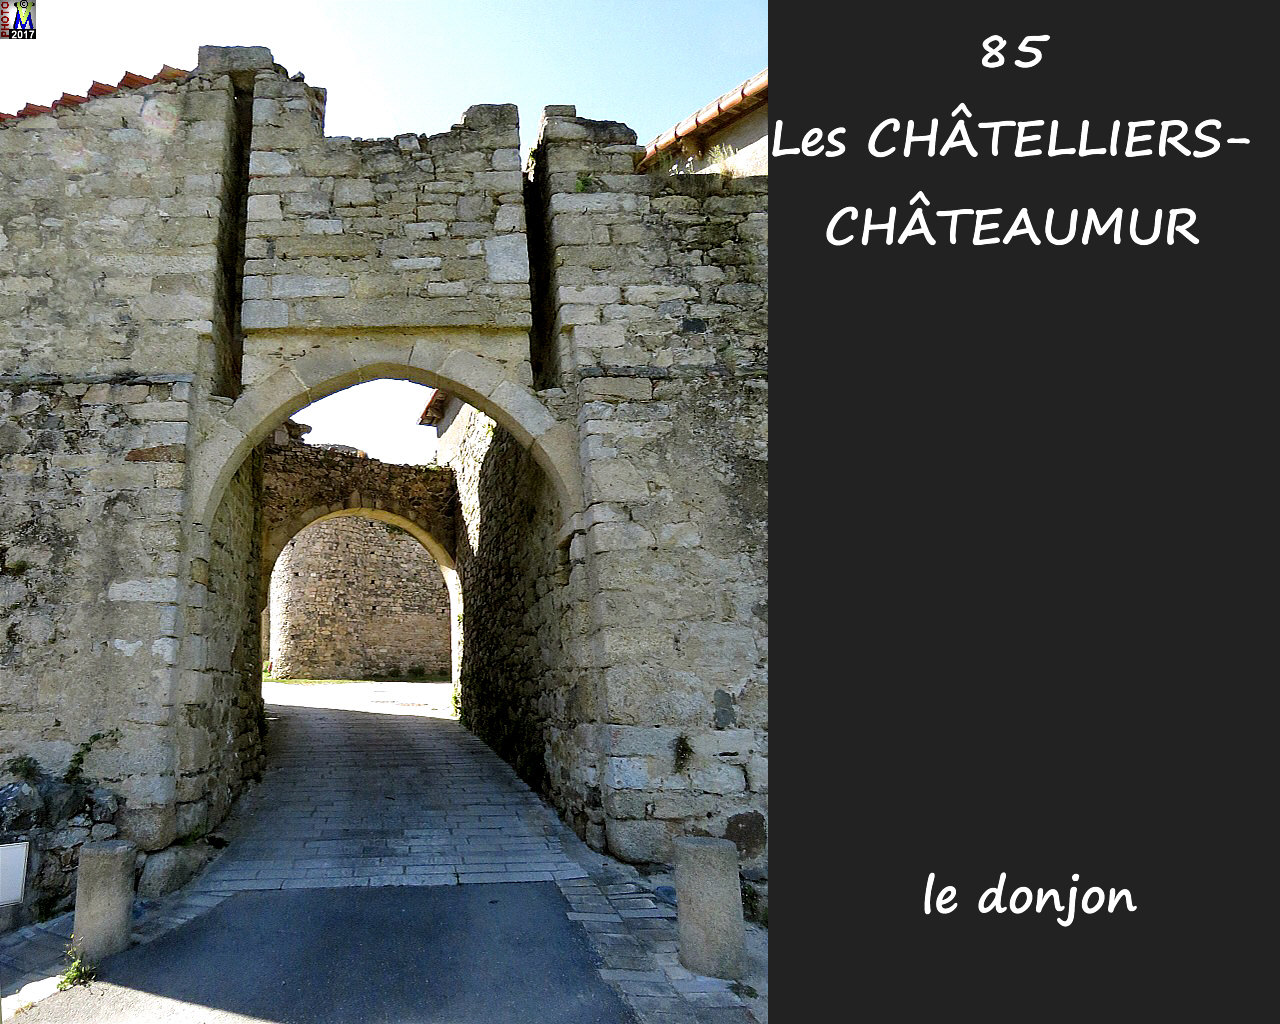 85CHATELLIERS-CHATEAUMUR_chateau_1022.jpg